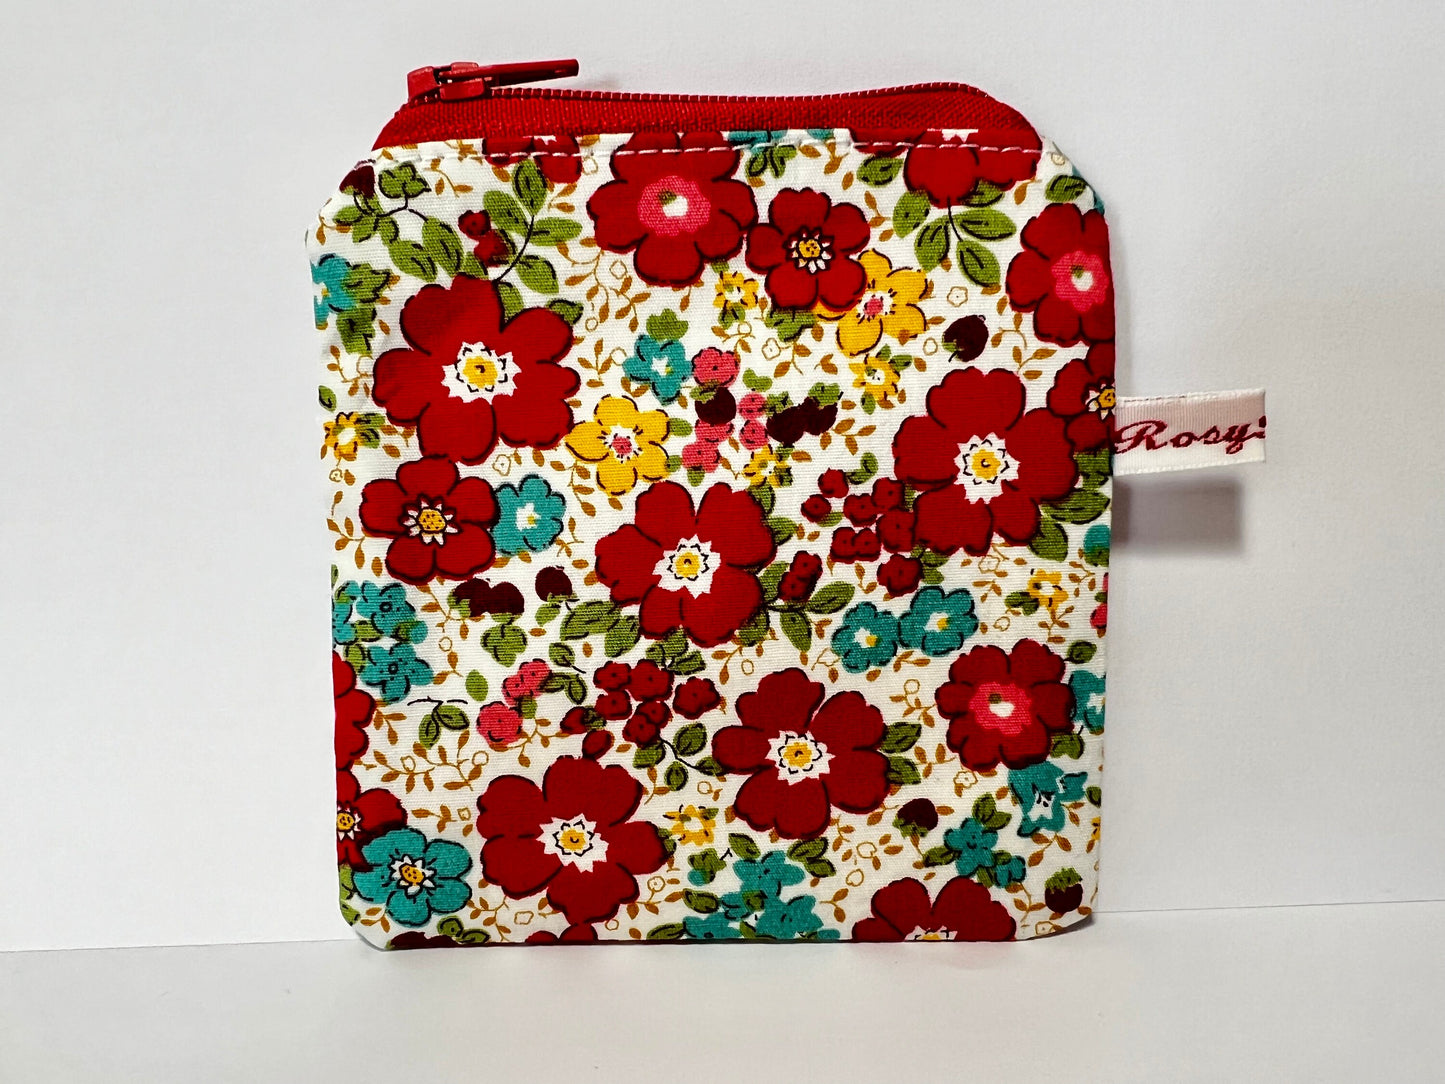 Spanish Floral Print Mini Notions Case for Knitters' Stitch Markers